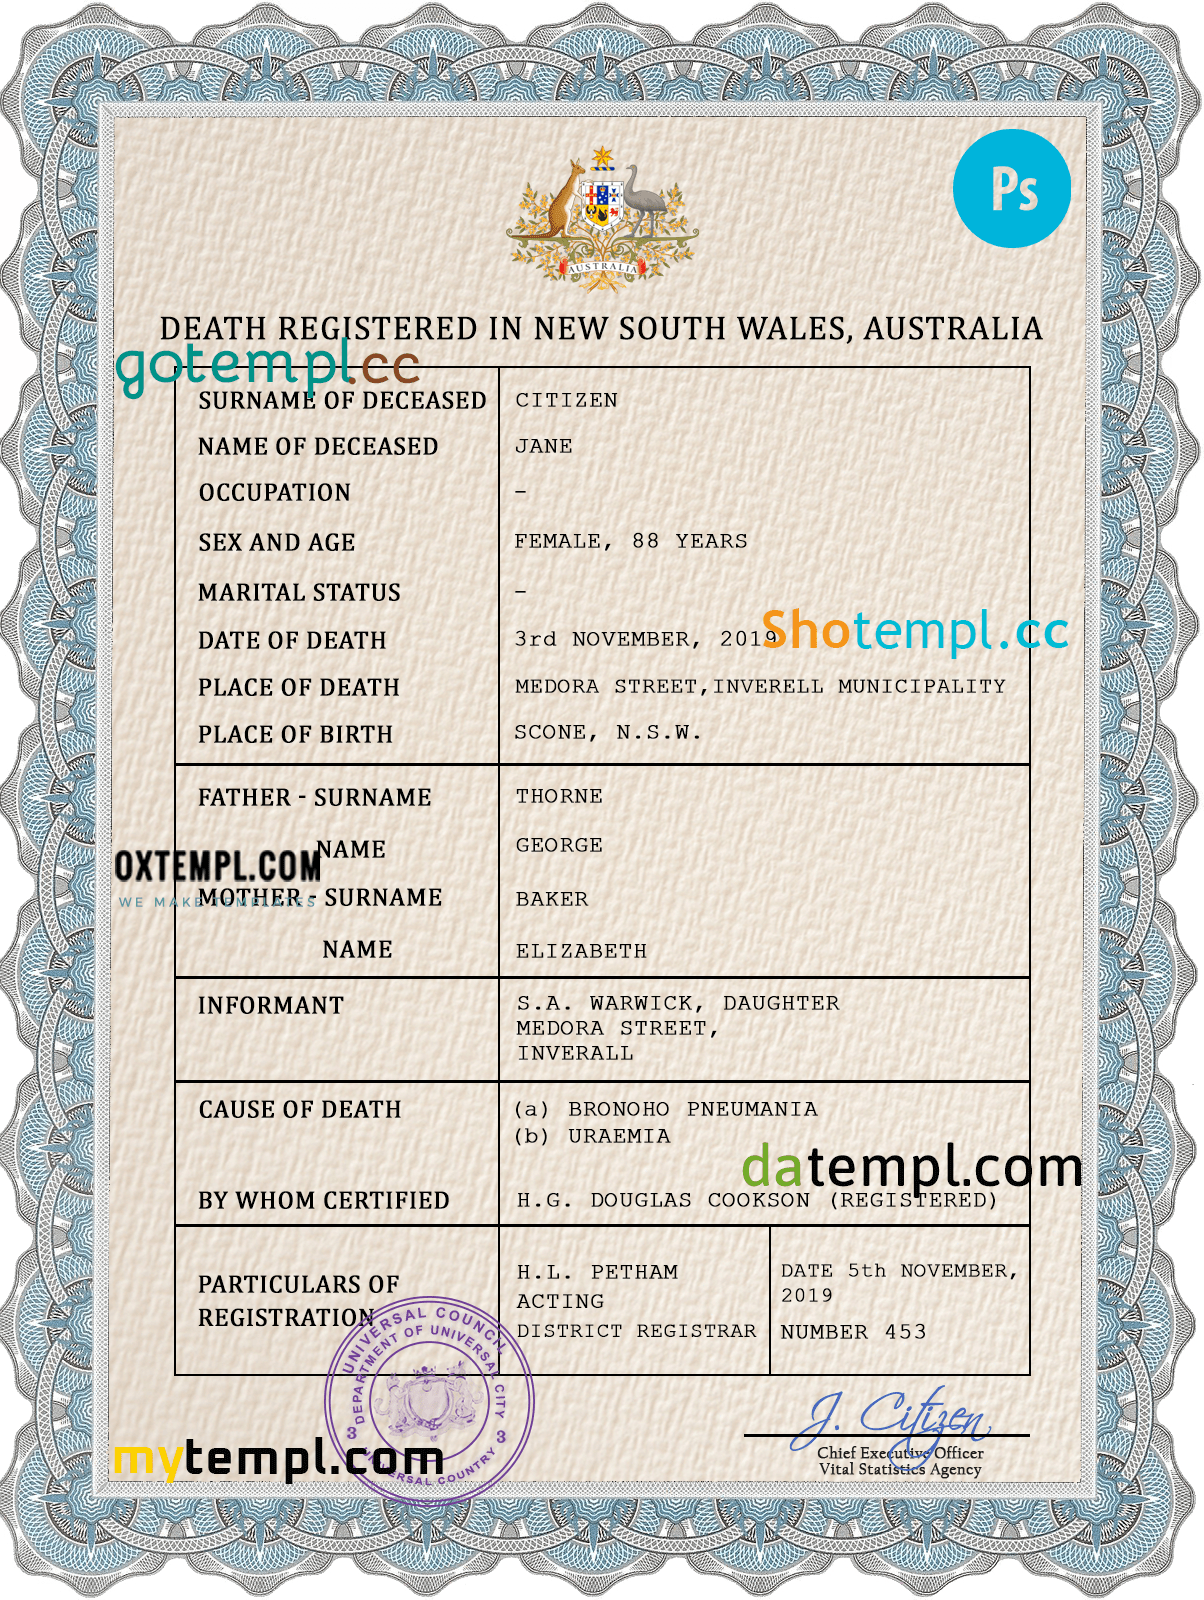 # arms unity death universal certificate PSD template, completely editable